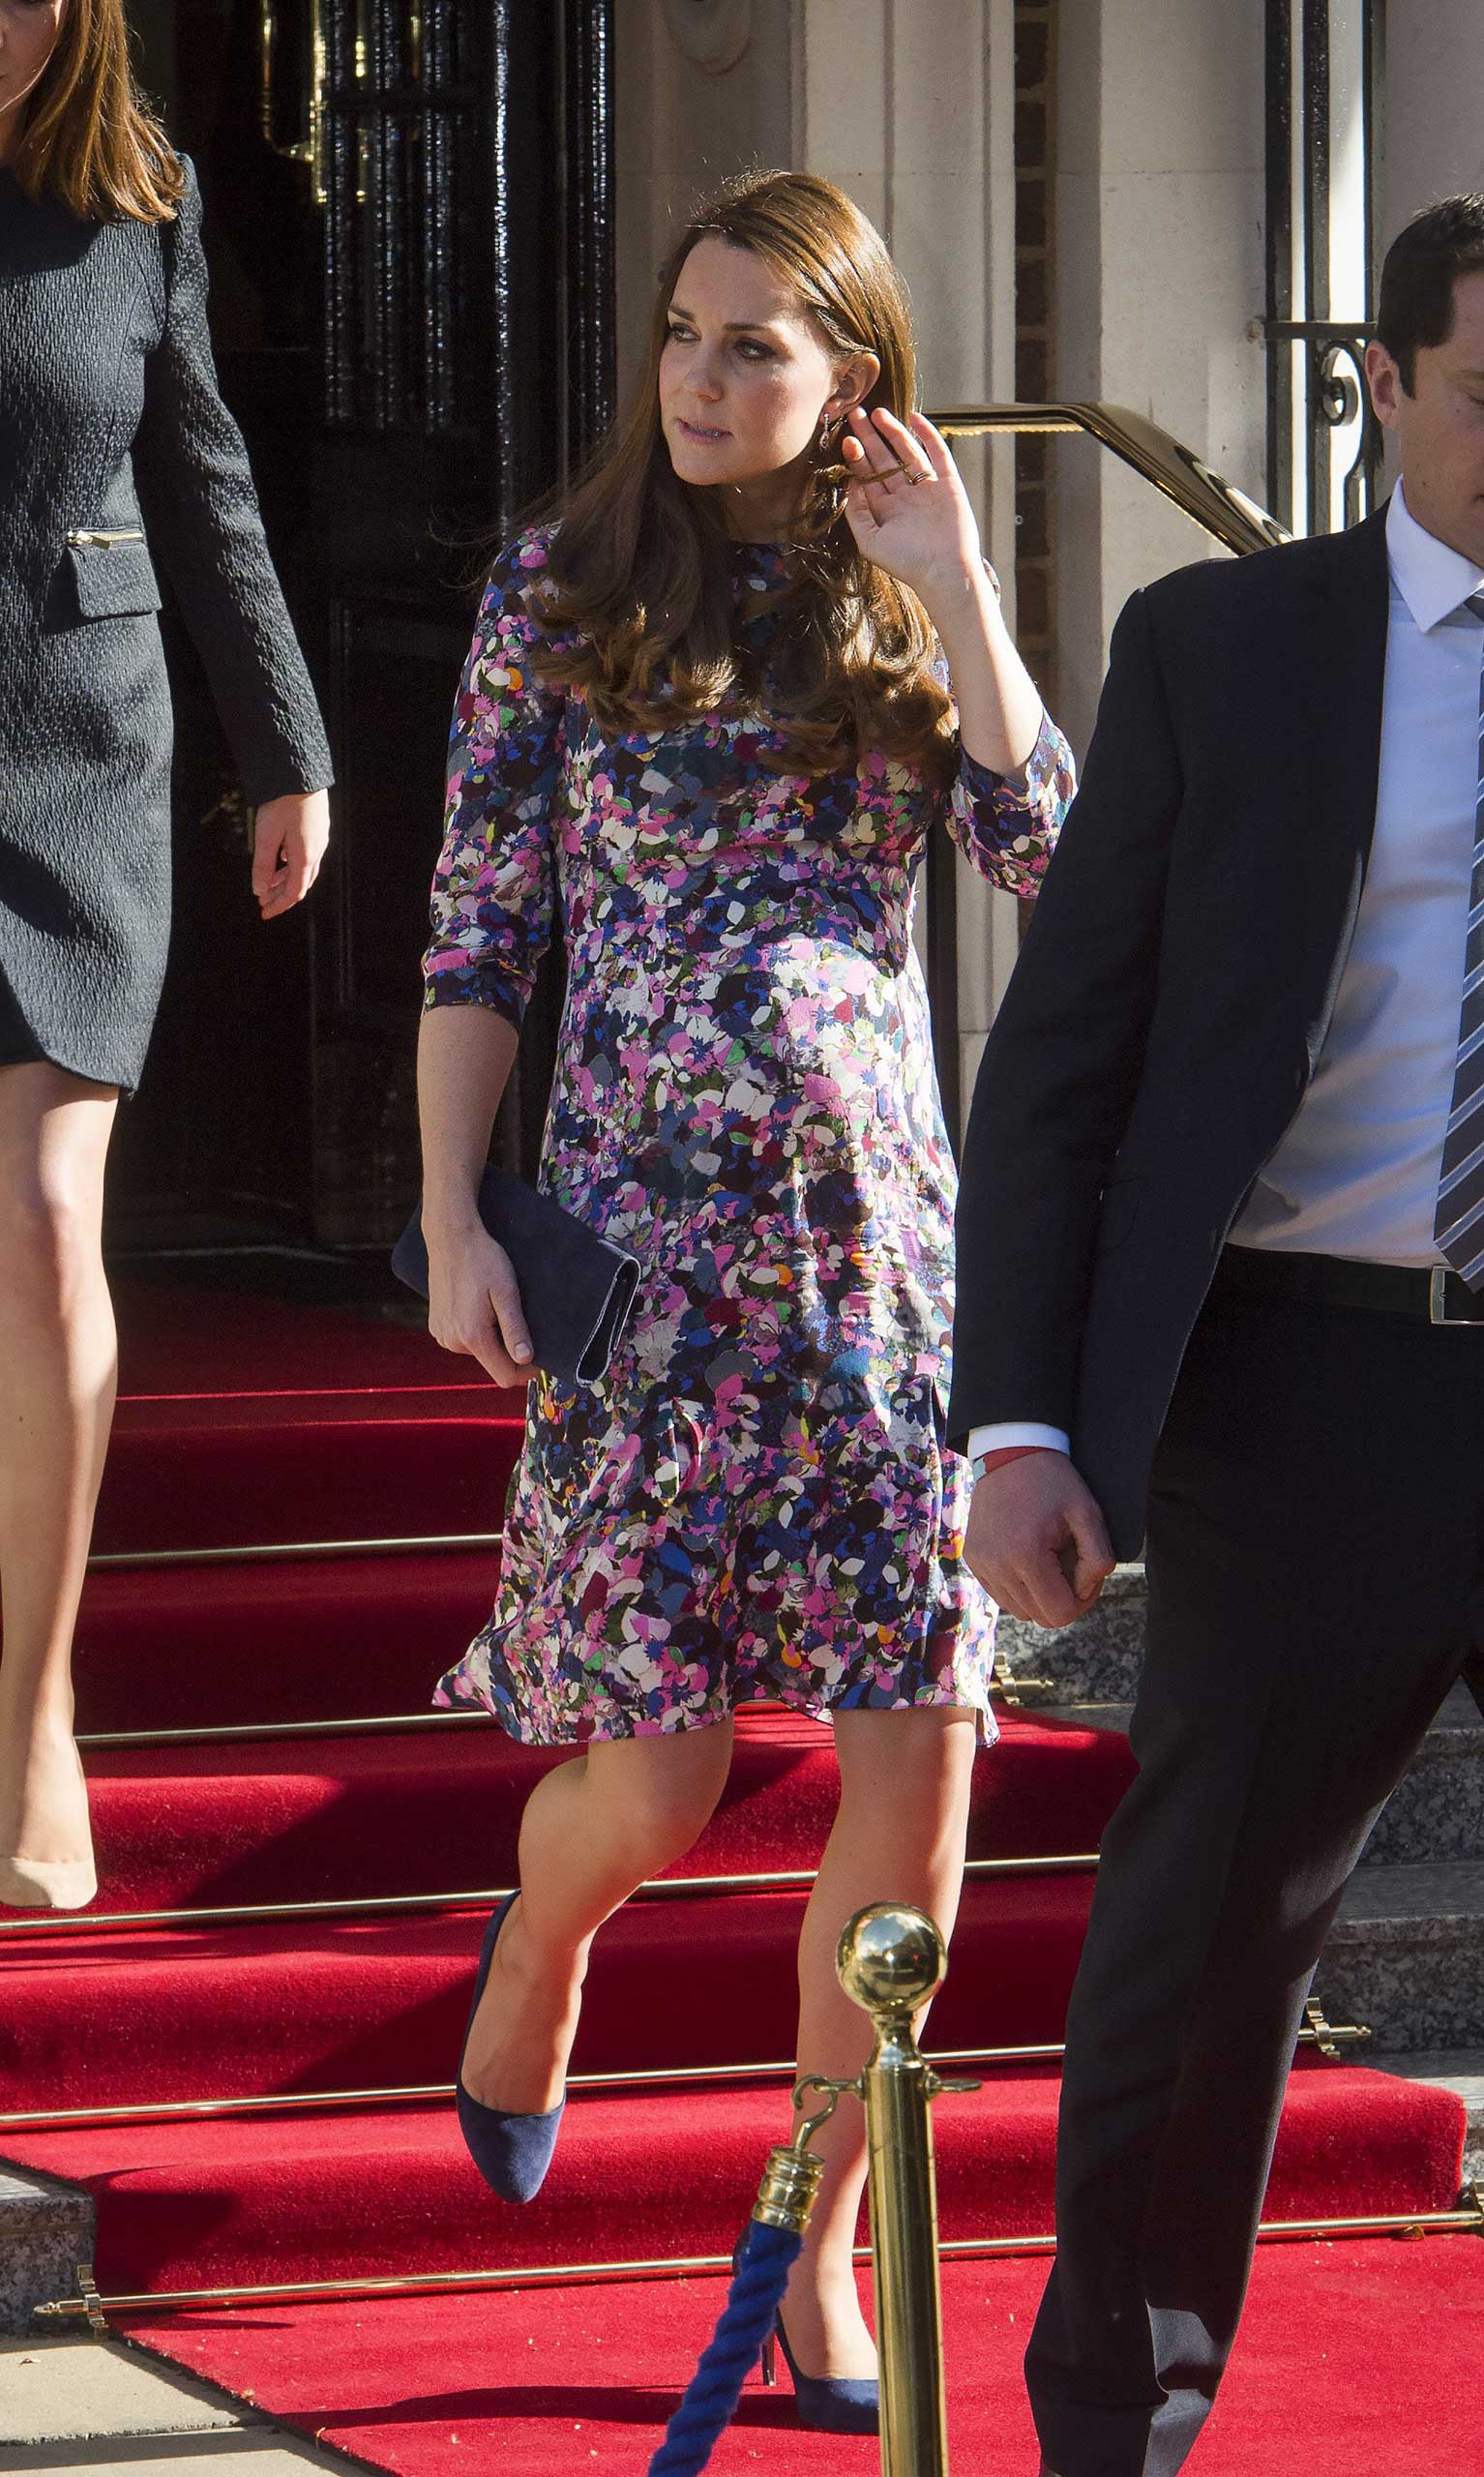 Catherine Duchess of Cambridge leaves The Goring Hotel in Victoria, London on March 2, 2015.